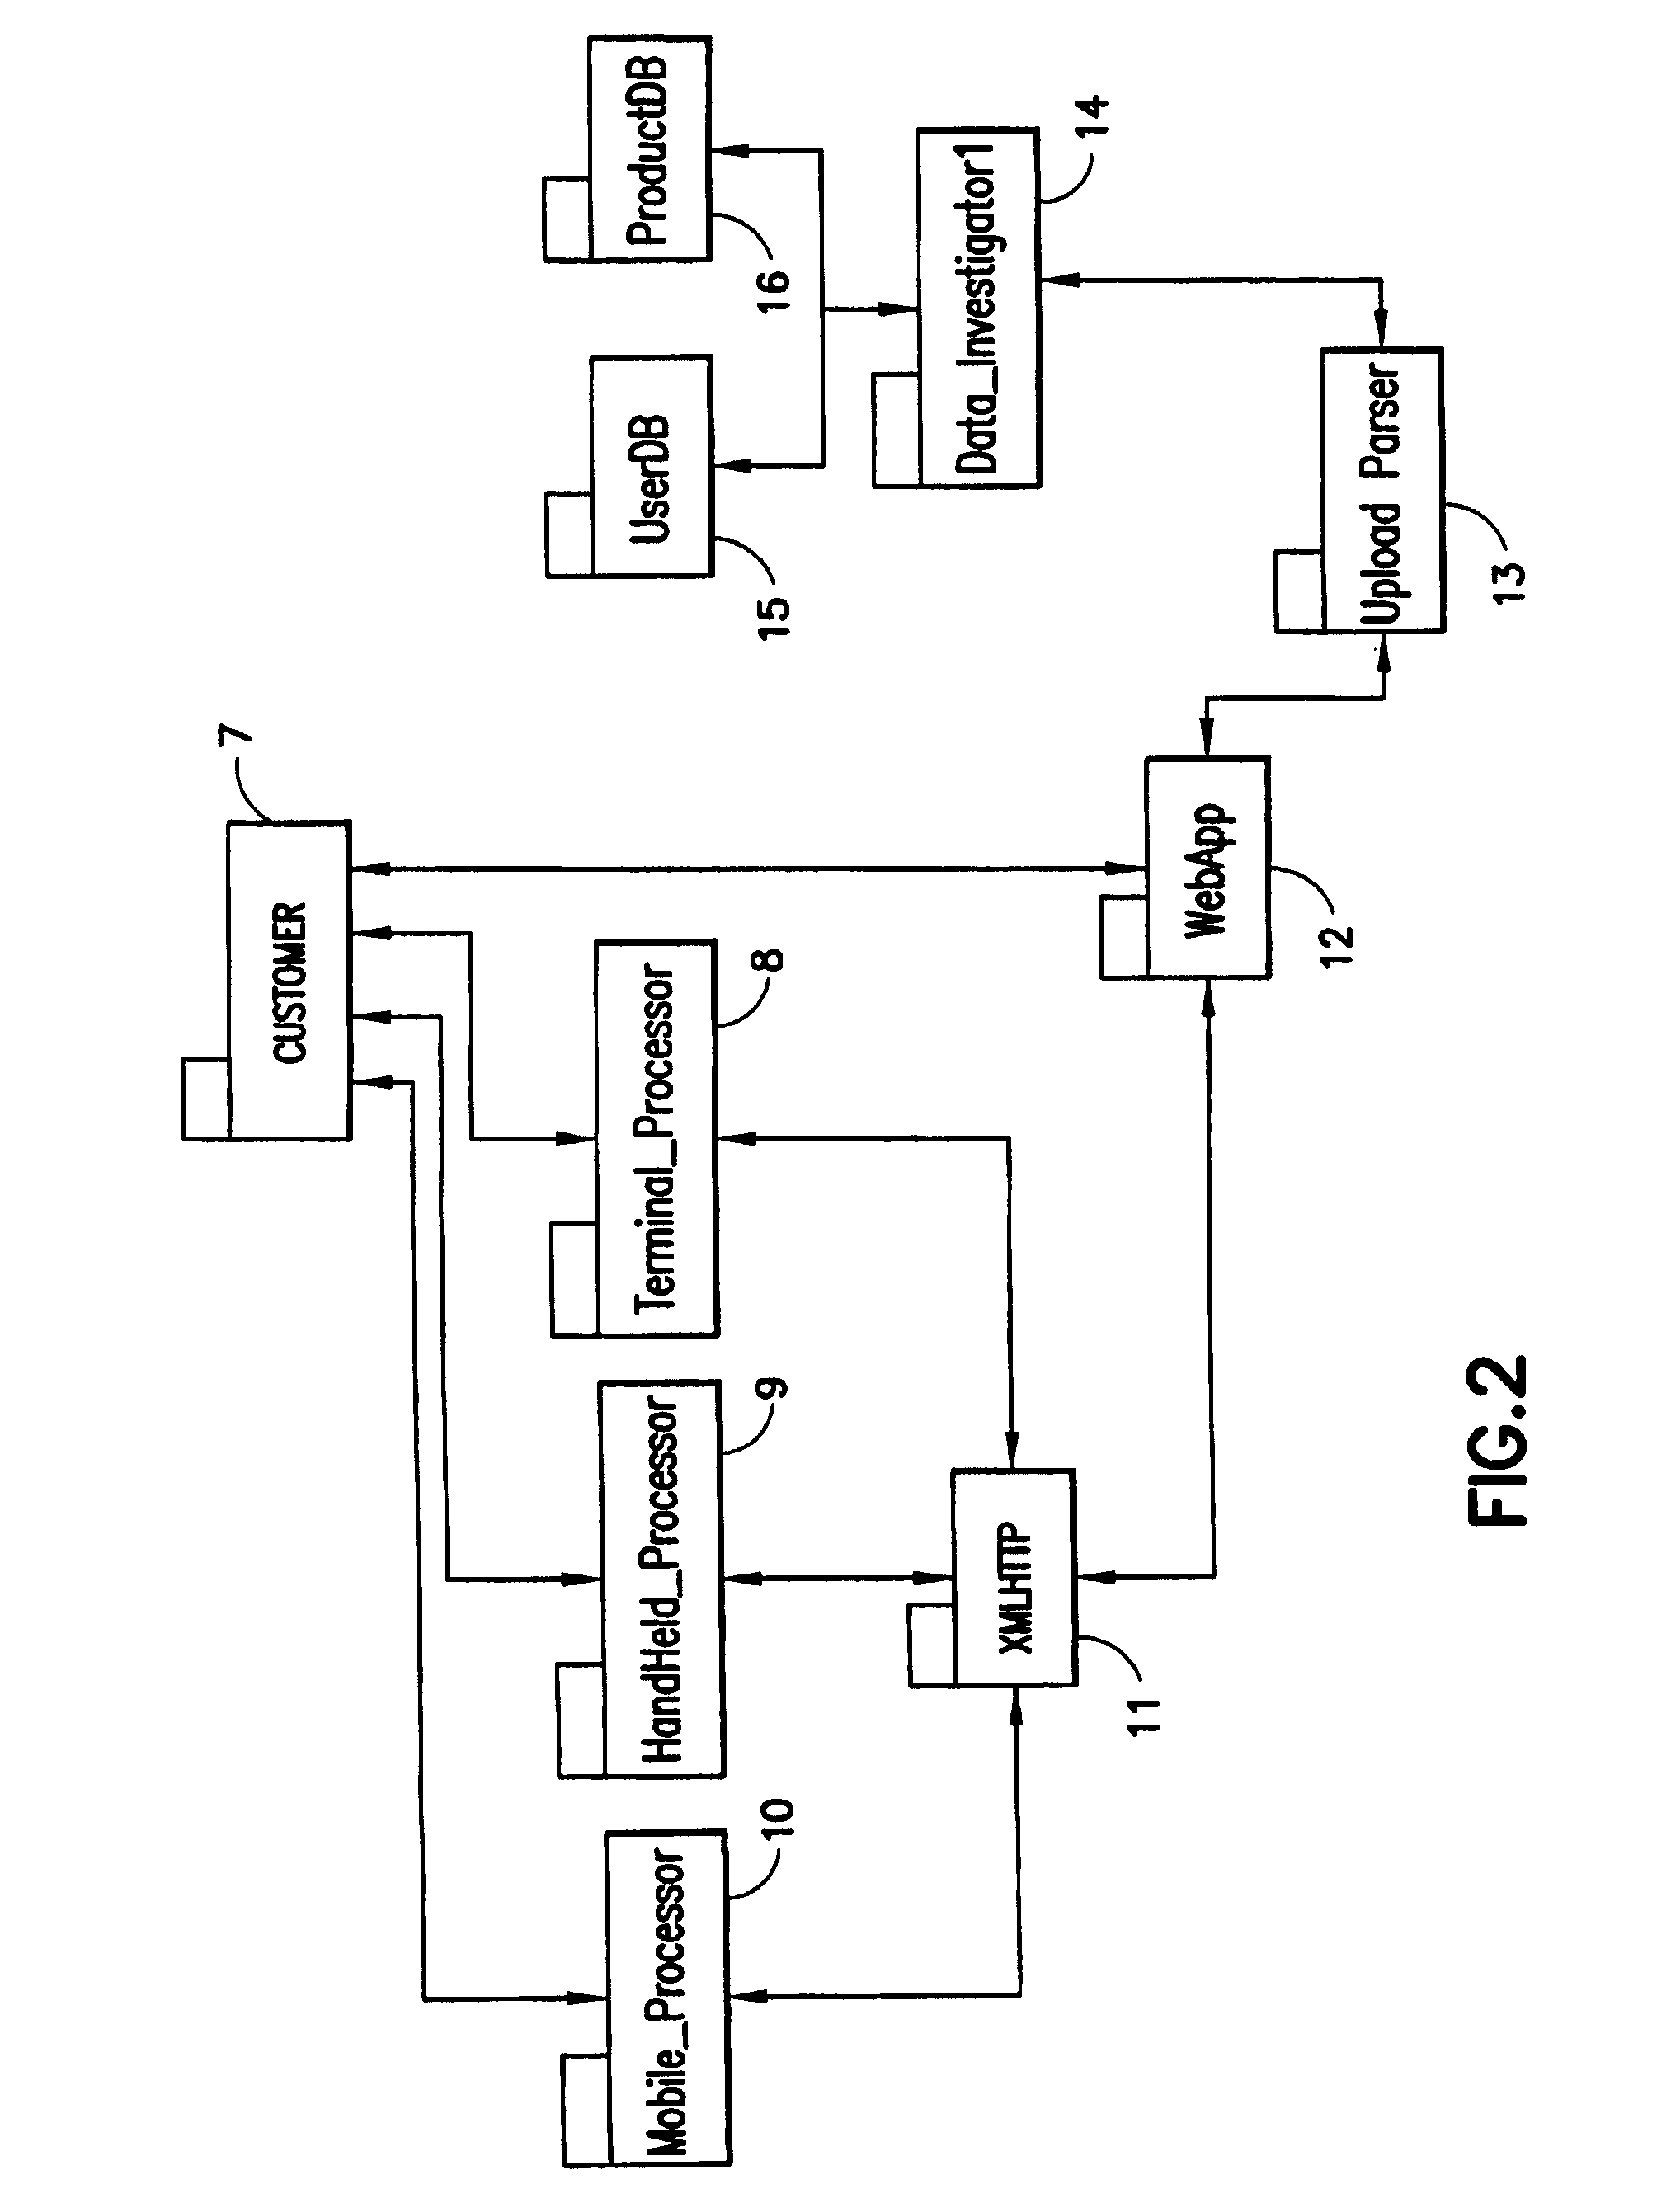 Systems and methods for a consumer to determine food/medicine interactions